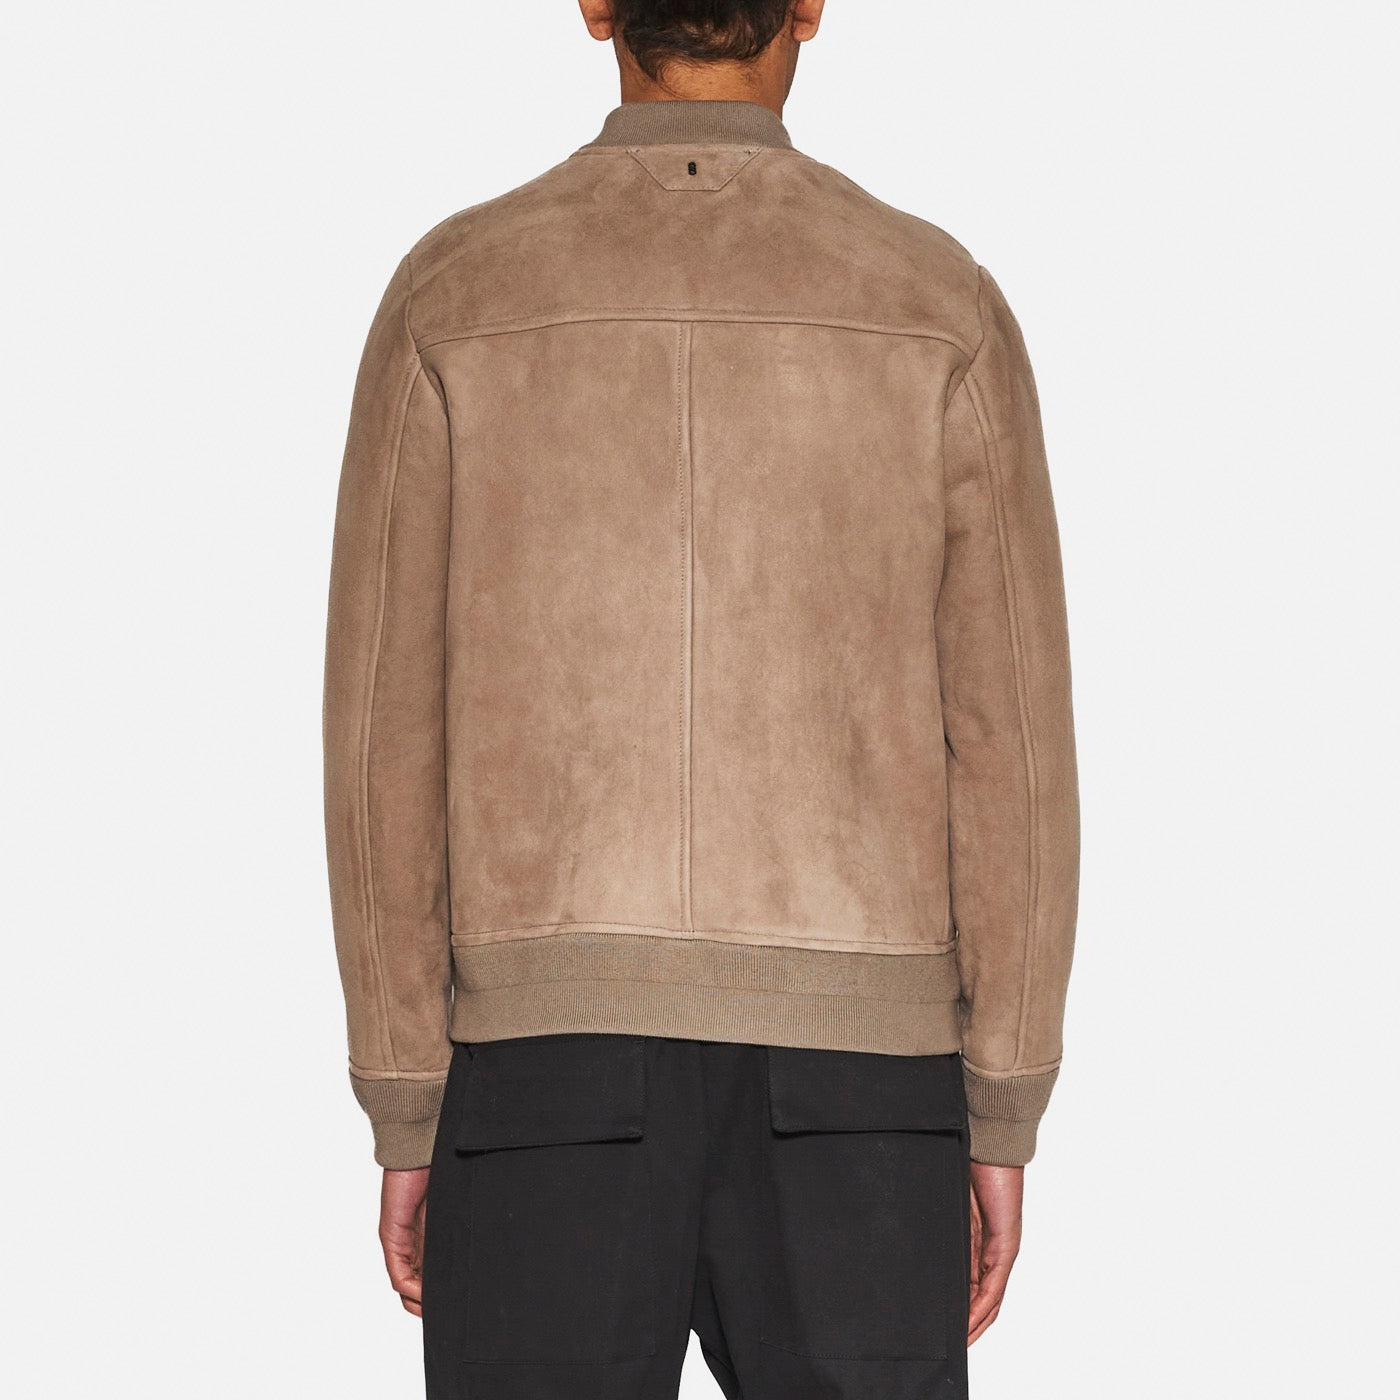 GIACCA BOMBER IN SHEARLING - SAND